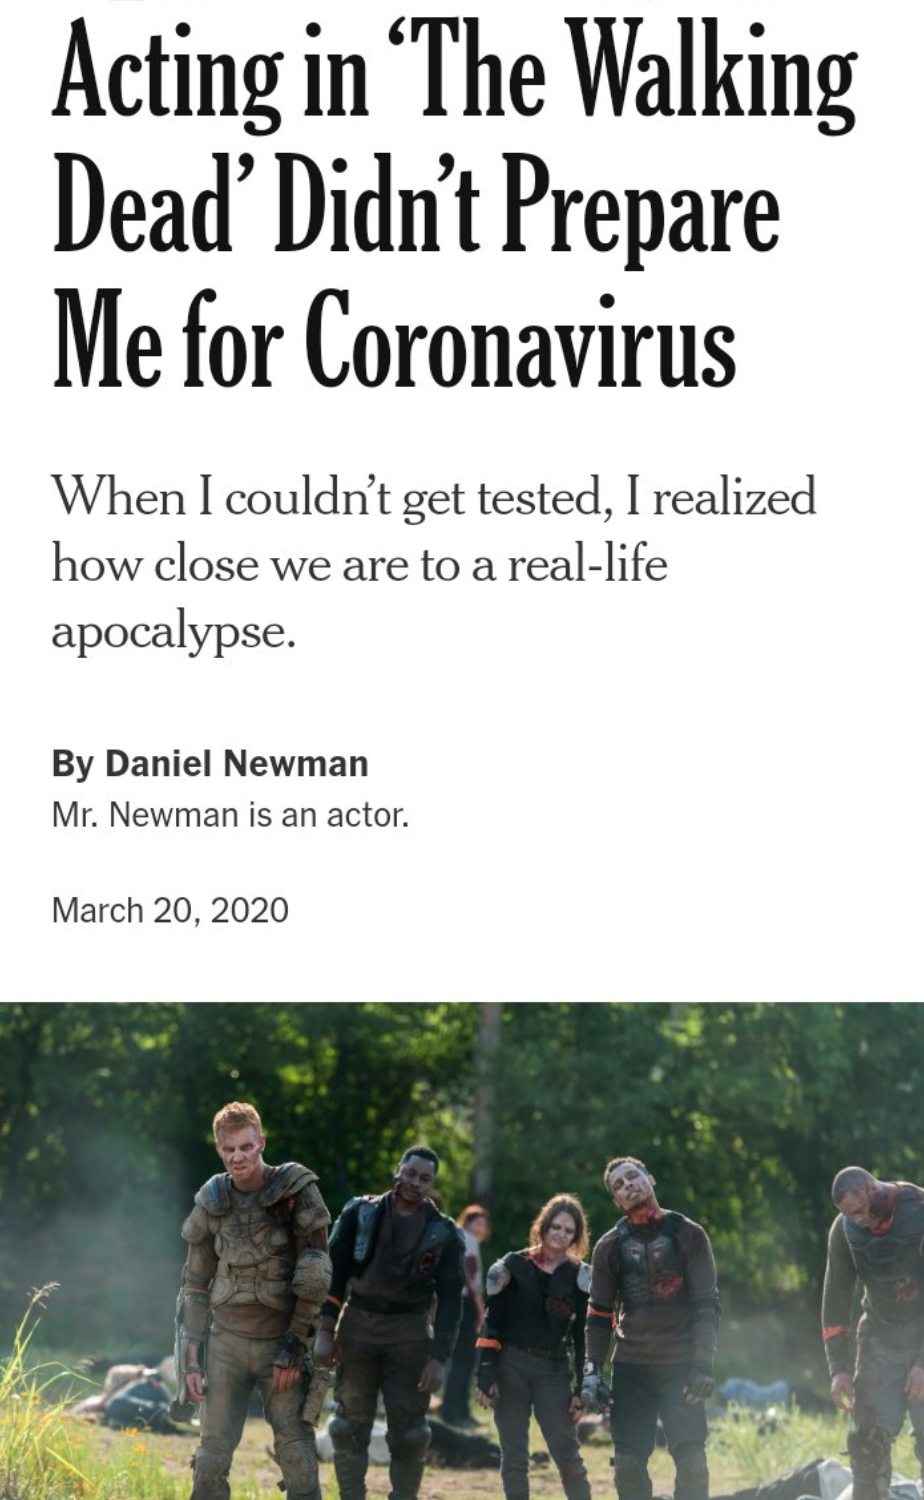 pegadaian - Acting in The Walking Dead'Didn't Prepare Me for Coronavirus When I couldn't get tested, I realized how close we are to a reallife apocalypse. By Daniel Newman Mr. Newman is an actor.